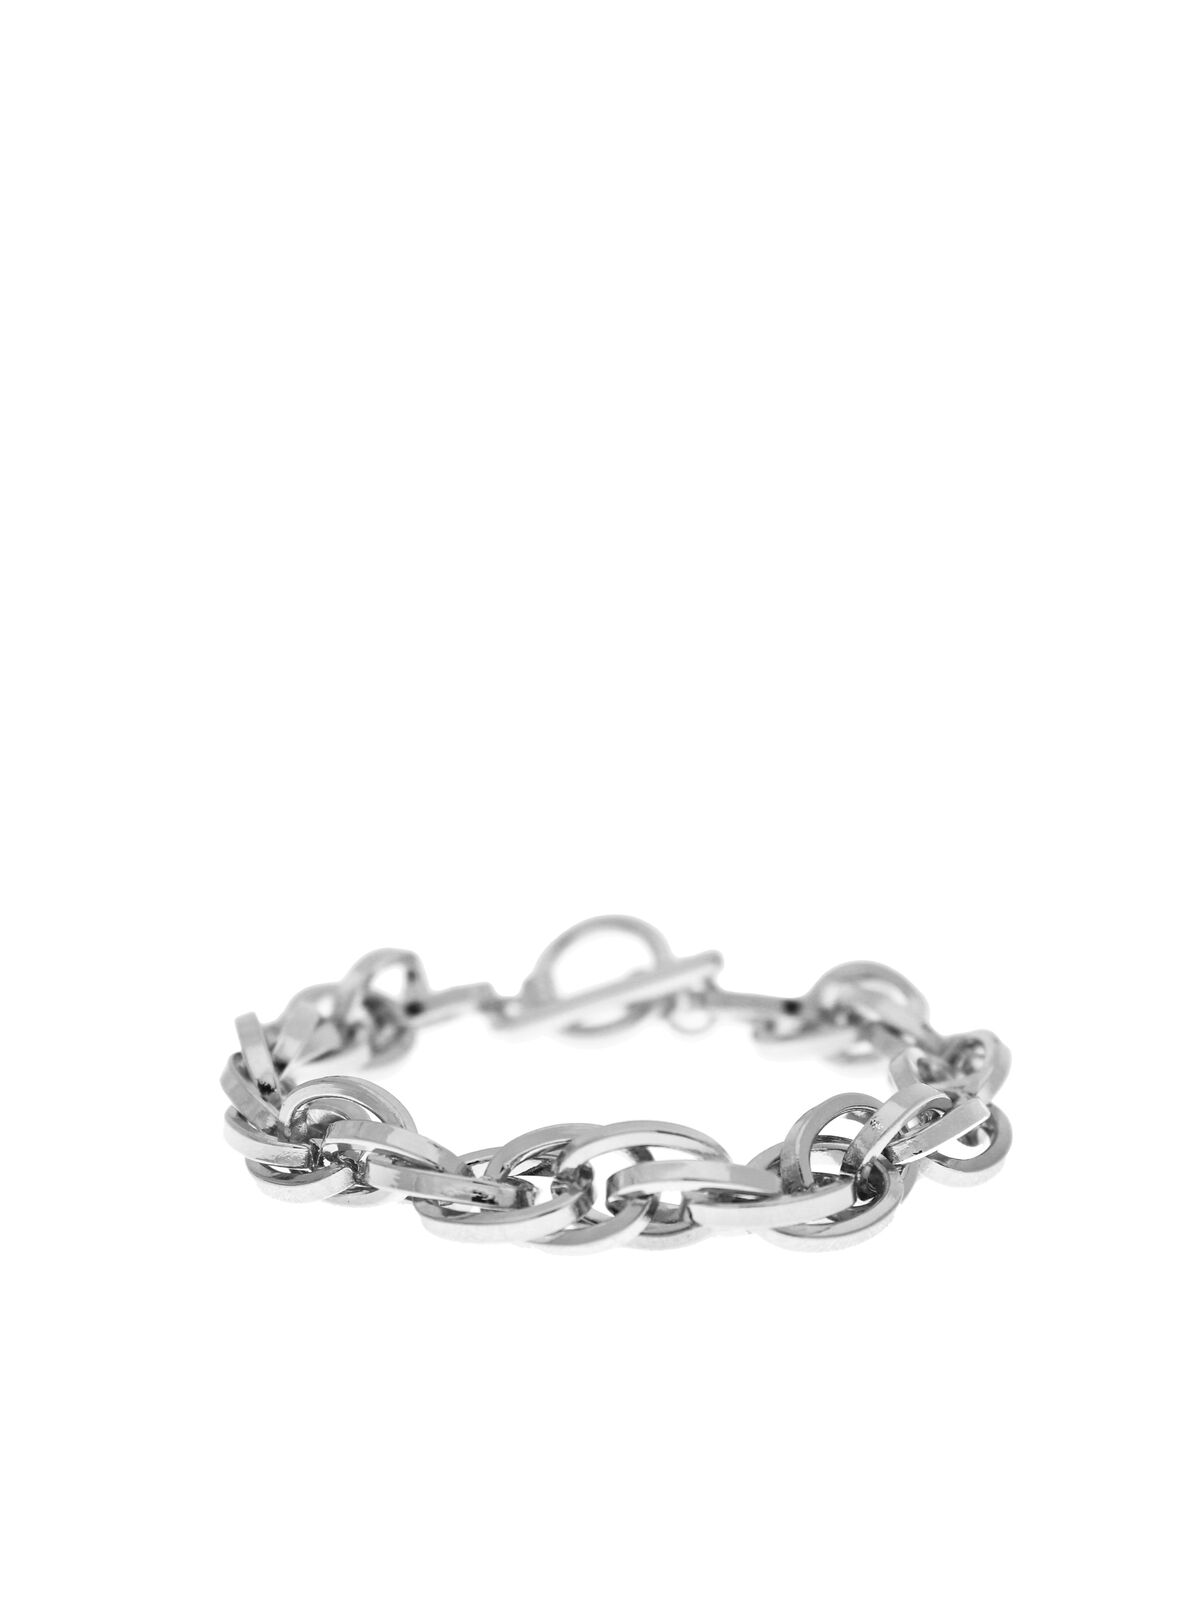 Marlyn Schiff Twisted Oval Link Toggle Bracelet